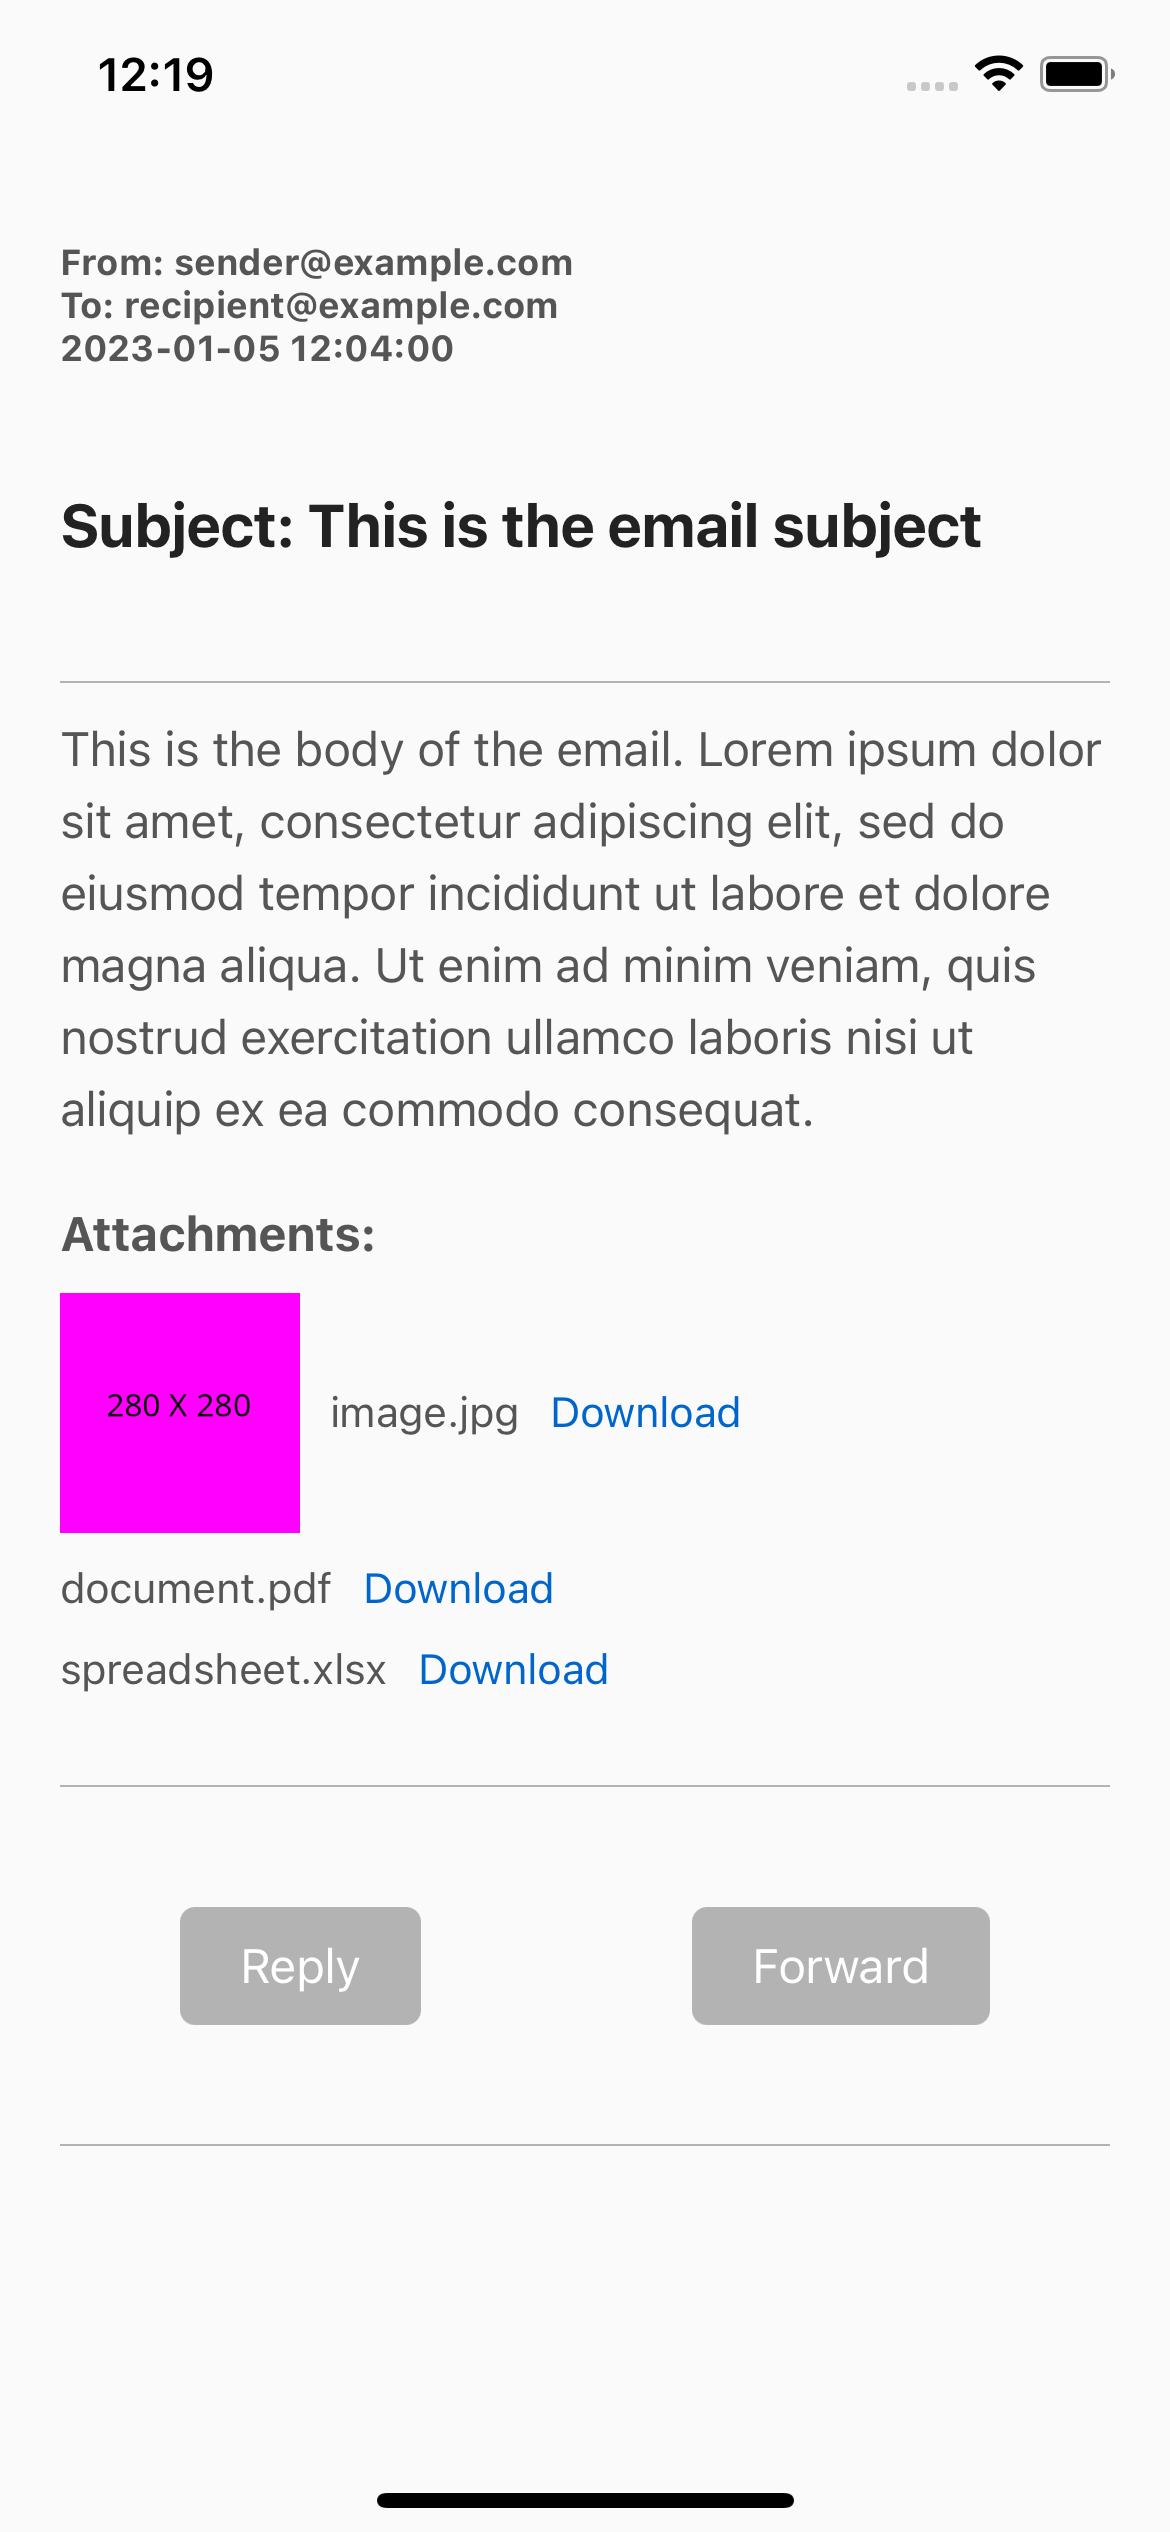 react native UI example. View email